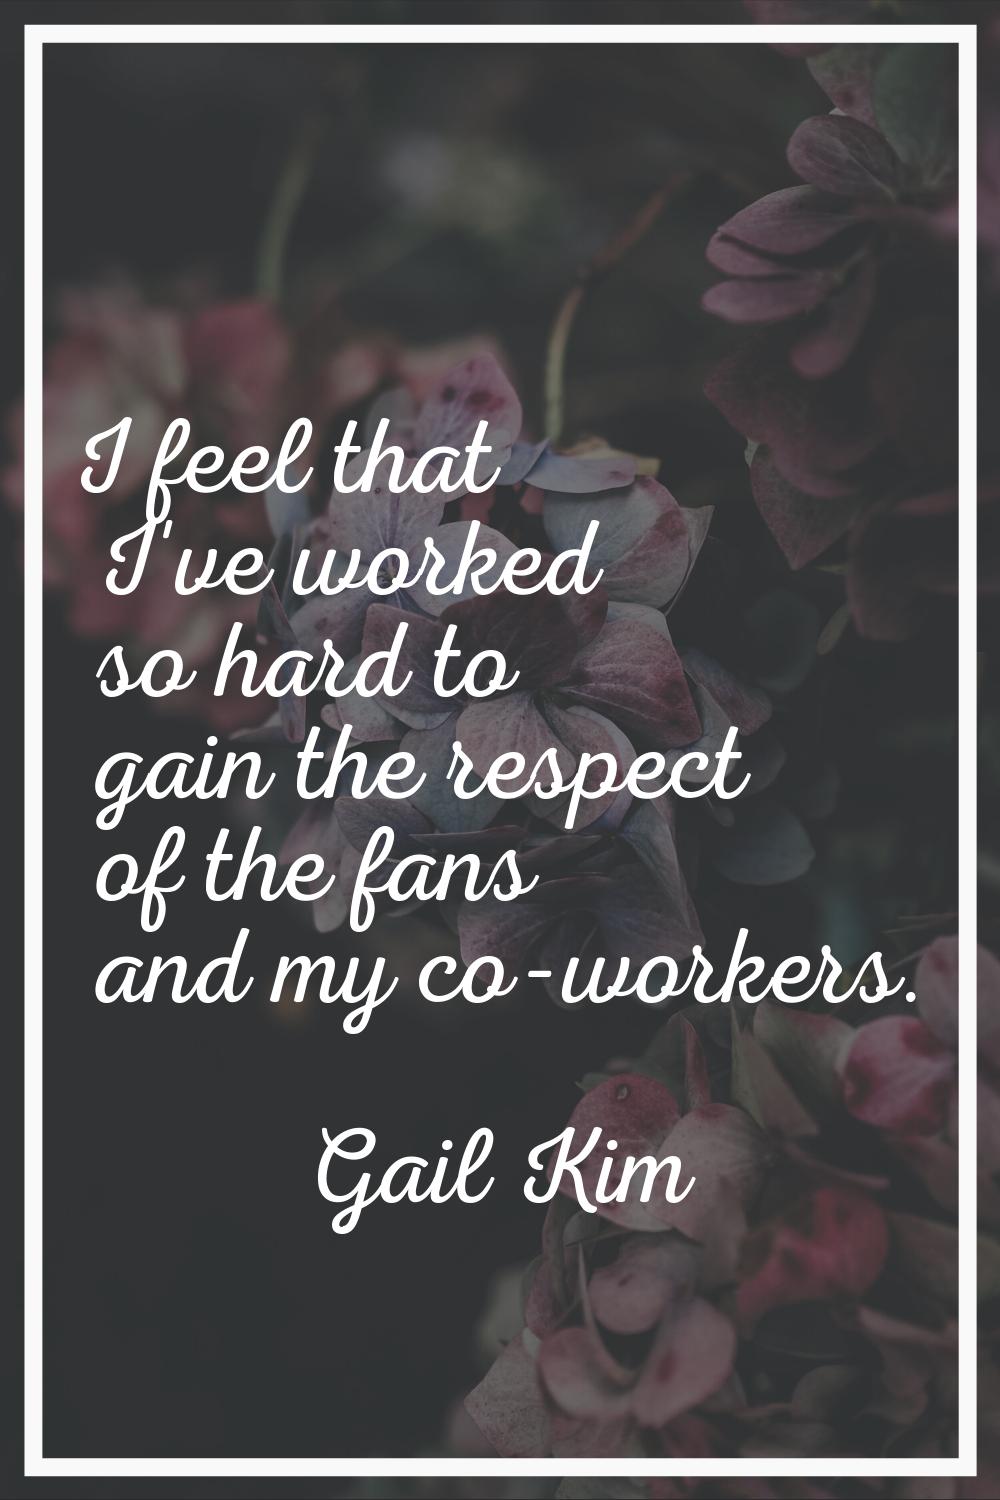 I feel that I've worked so hard to gain the respect of the fans and my co-workers.